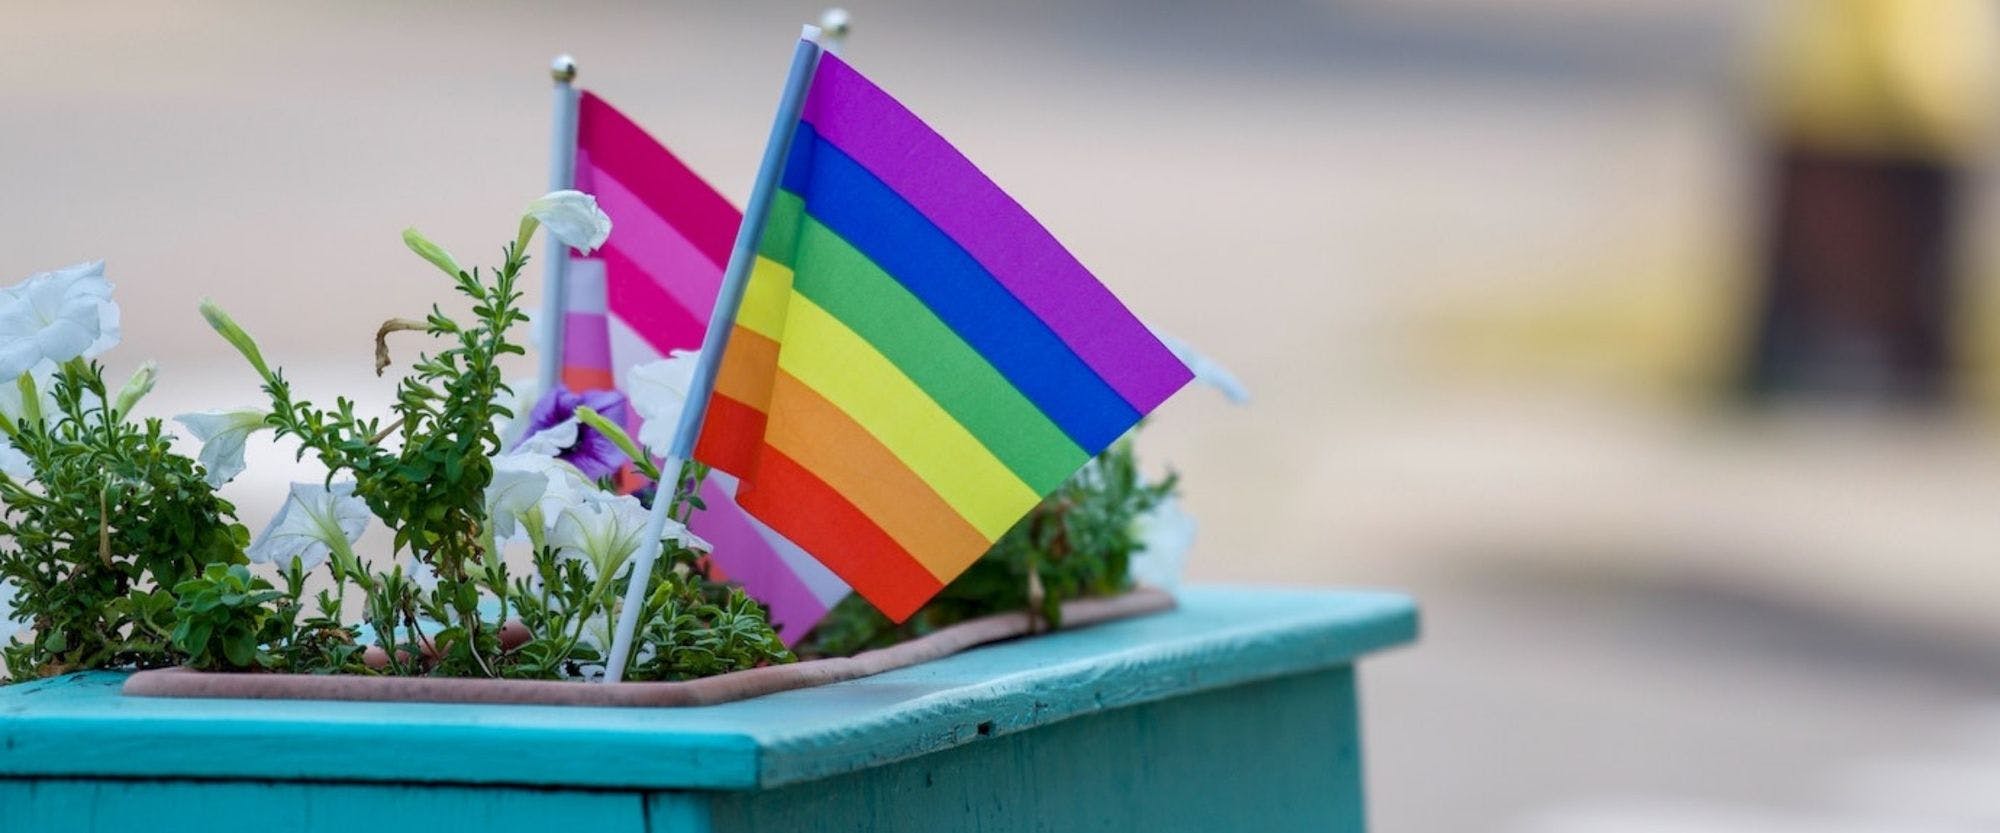 Understanding the prejudice against, and struggles of the LGBTQIA+ community